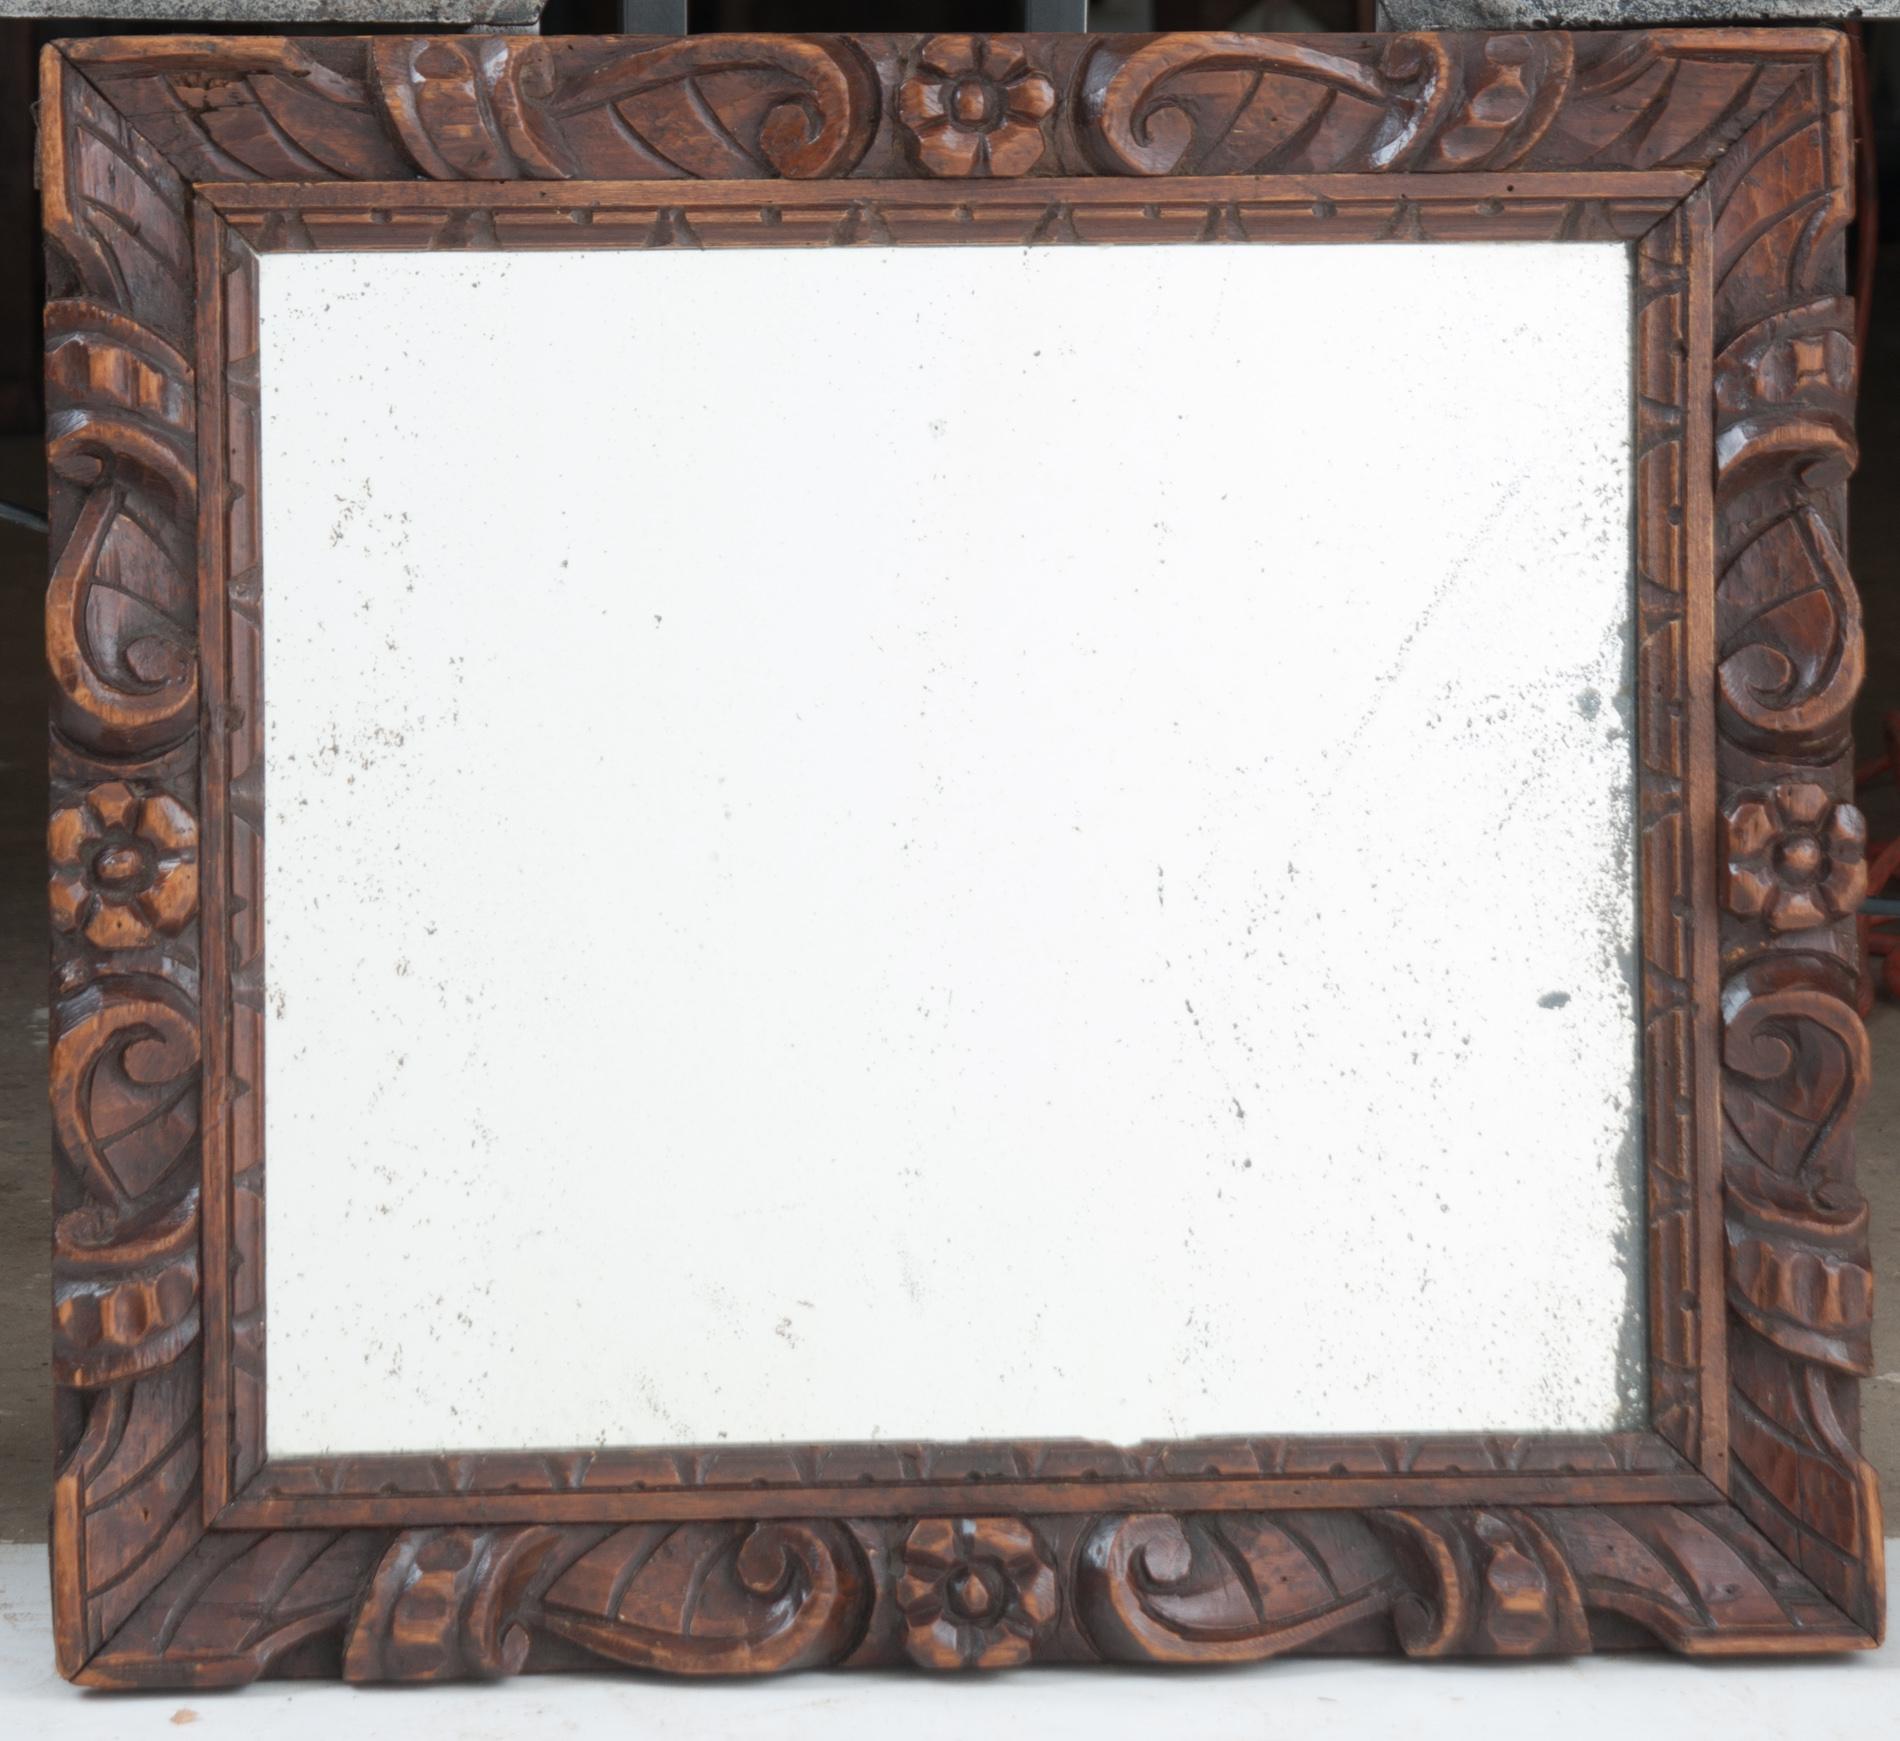 Wonderful little mirror from France. Hand carved in the early 1800s with wonderful movement and floral designs. Mirror may be more recent, but has some wonderful foxing.